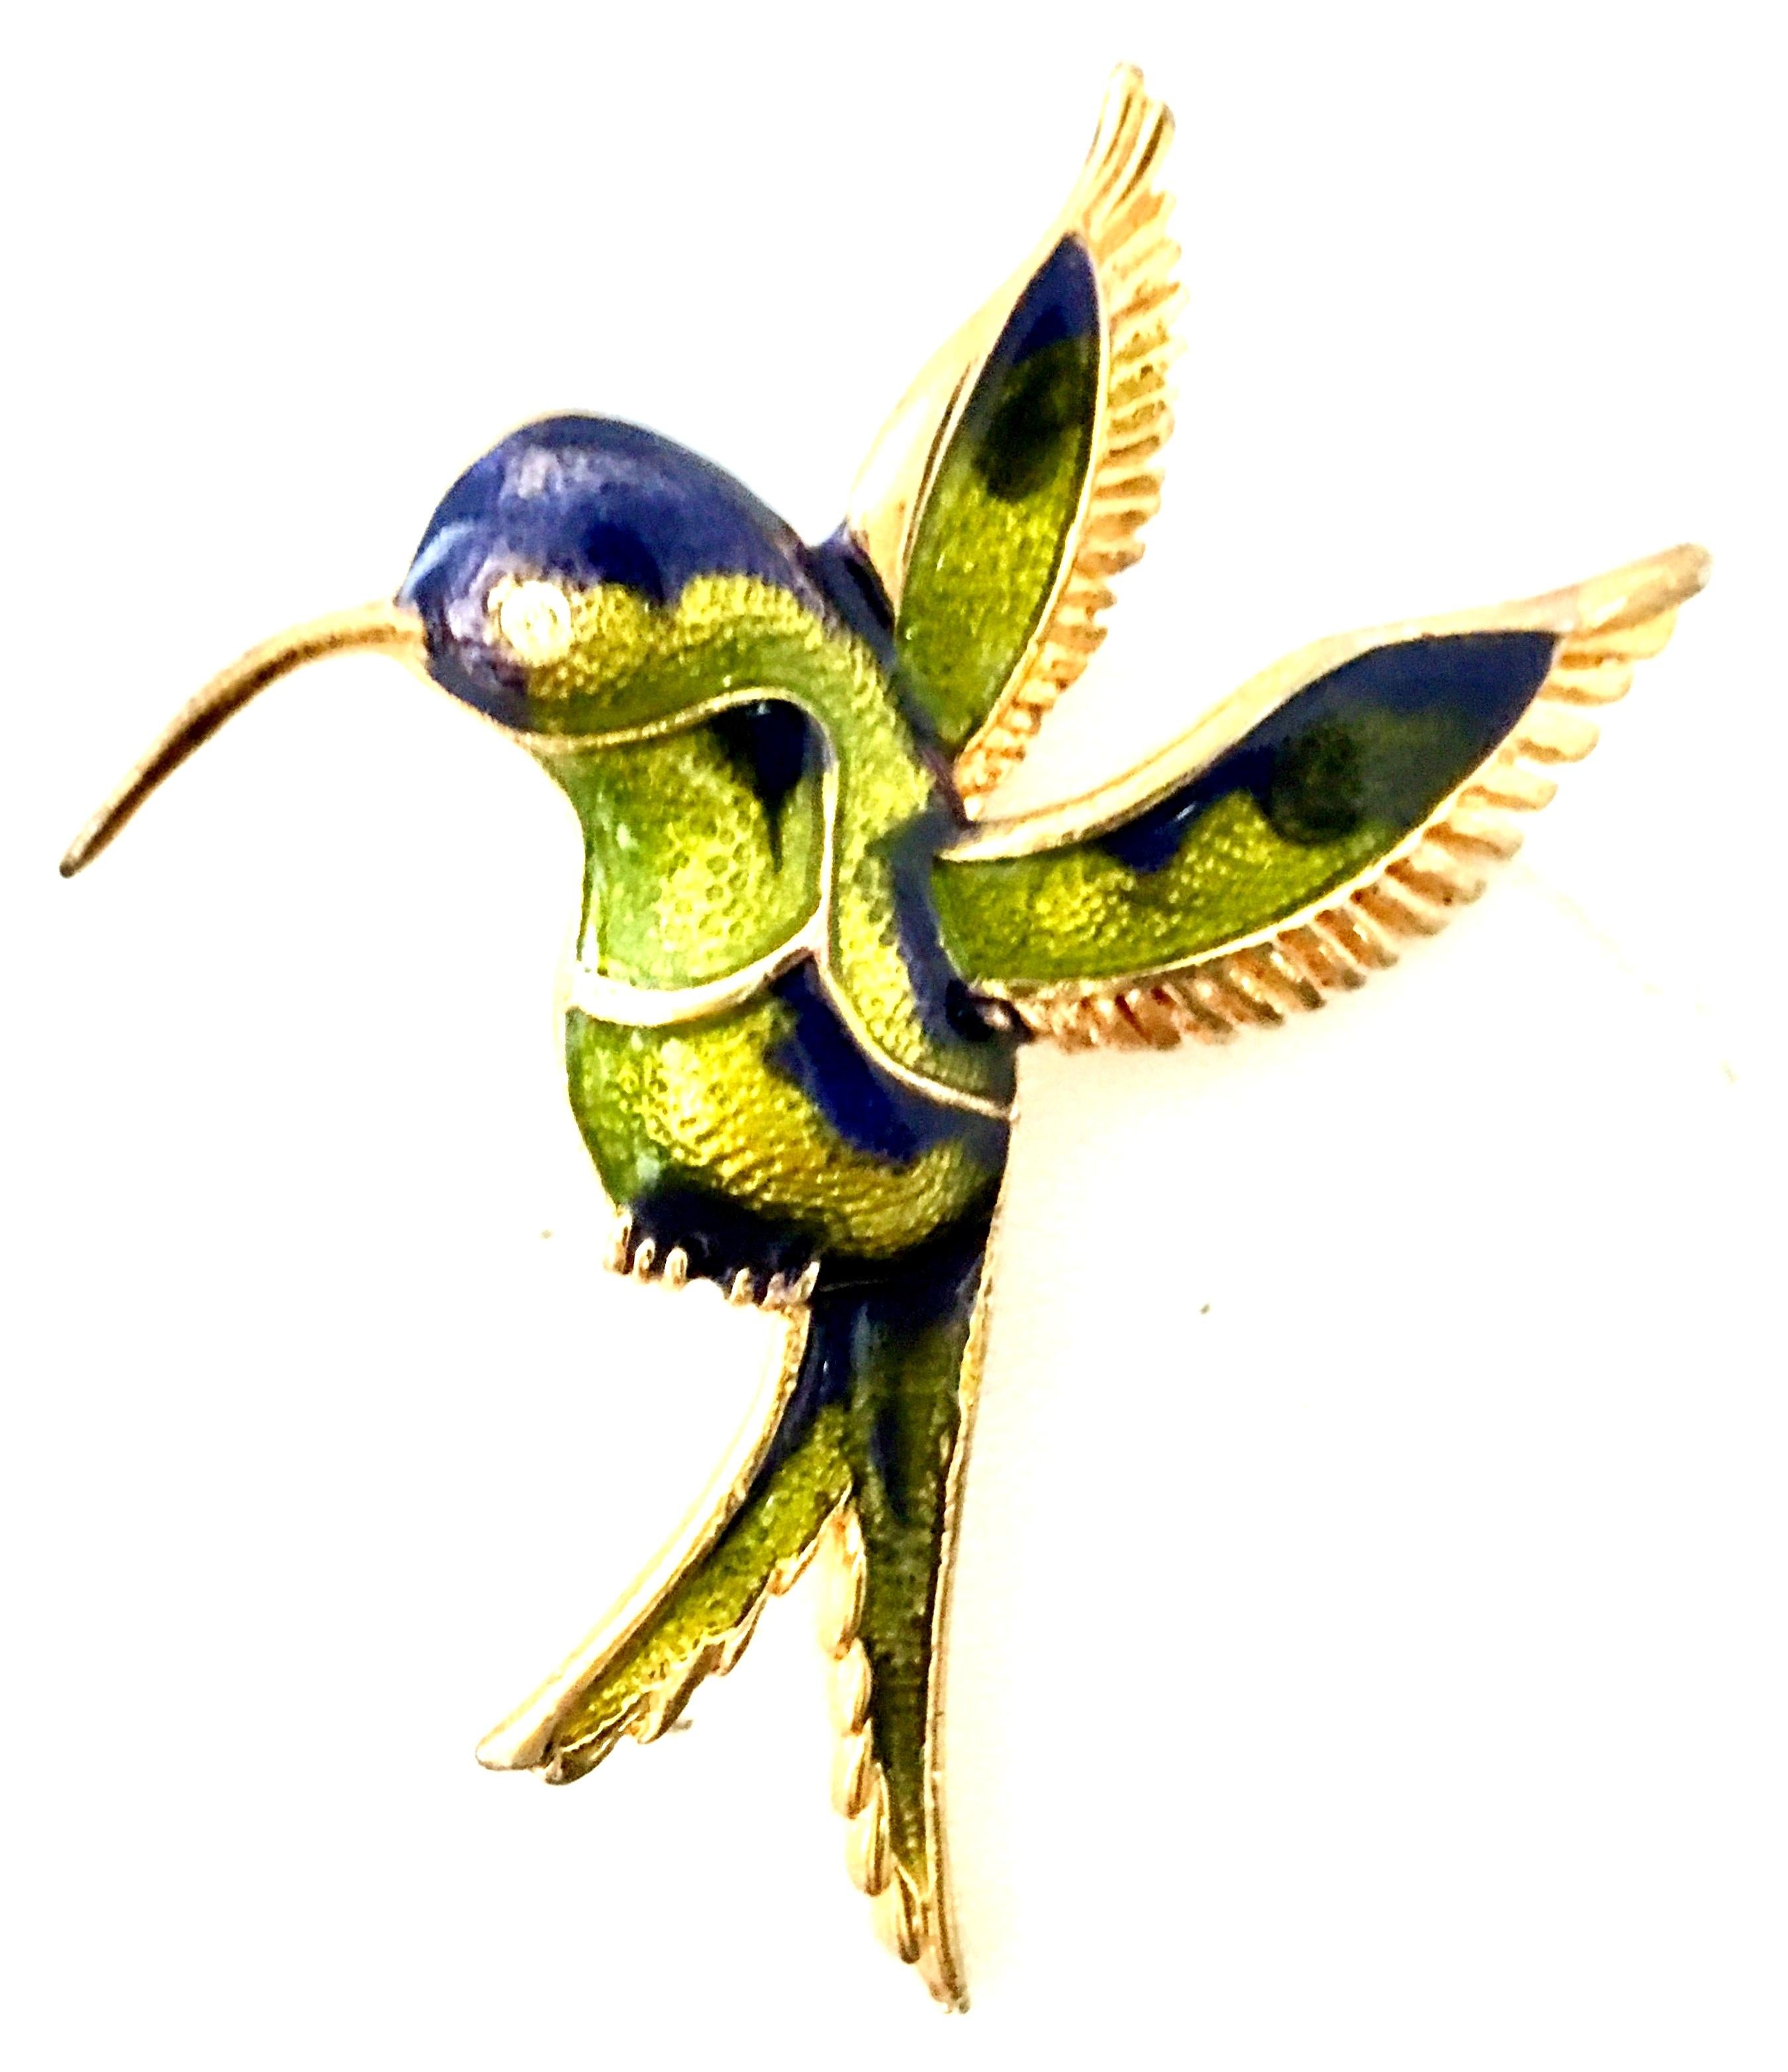 20th Century Gold Plate, Enamel & Austrian Crystal Hummingbird Brooch. Features a gold plate base metal with chartreuse green and navy blue enamel detail. The bird's eye is a single Austrian crystal clear rhinestone. 